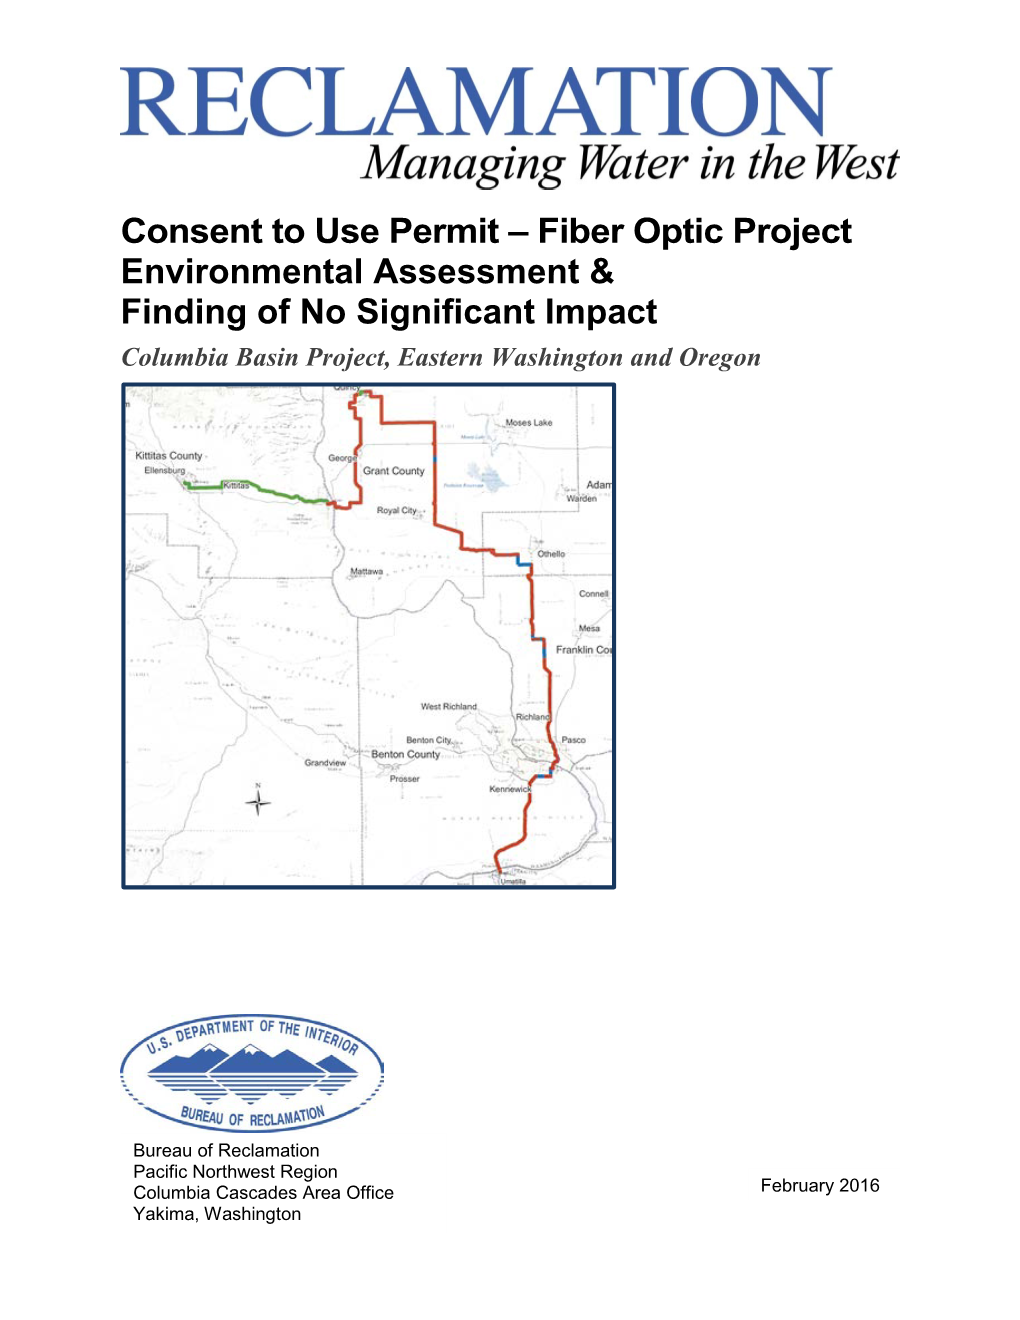 Consent to Use Permit – Fiber Optic Project Environmental Assessment & Finding of No Significant Impact Columbia Basin Project, Eastern Washington and Oregon